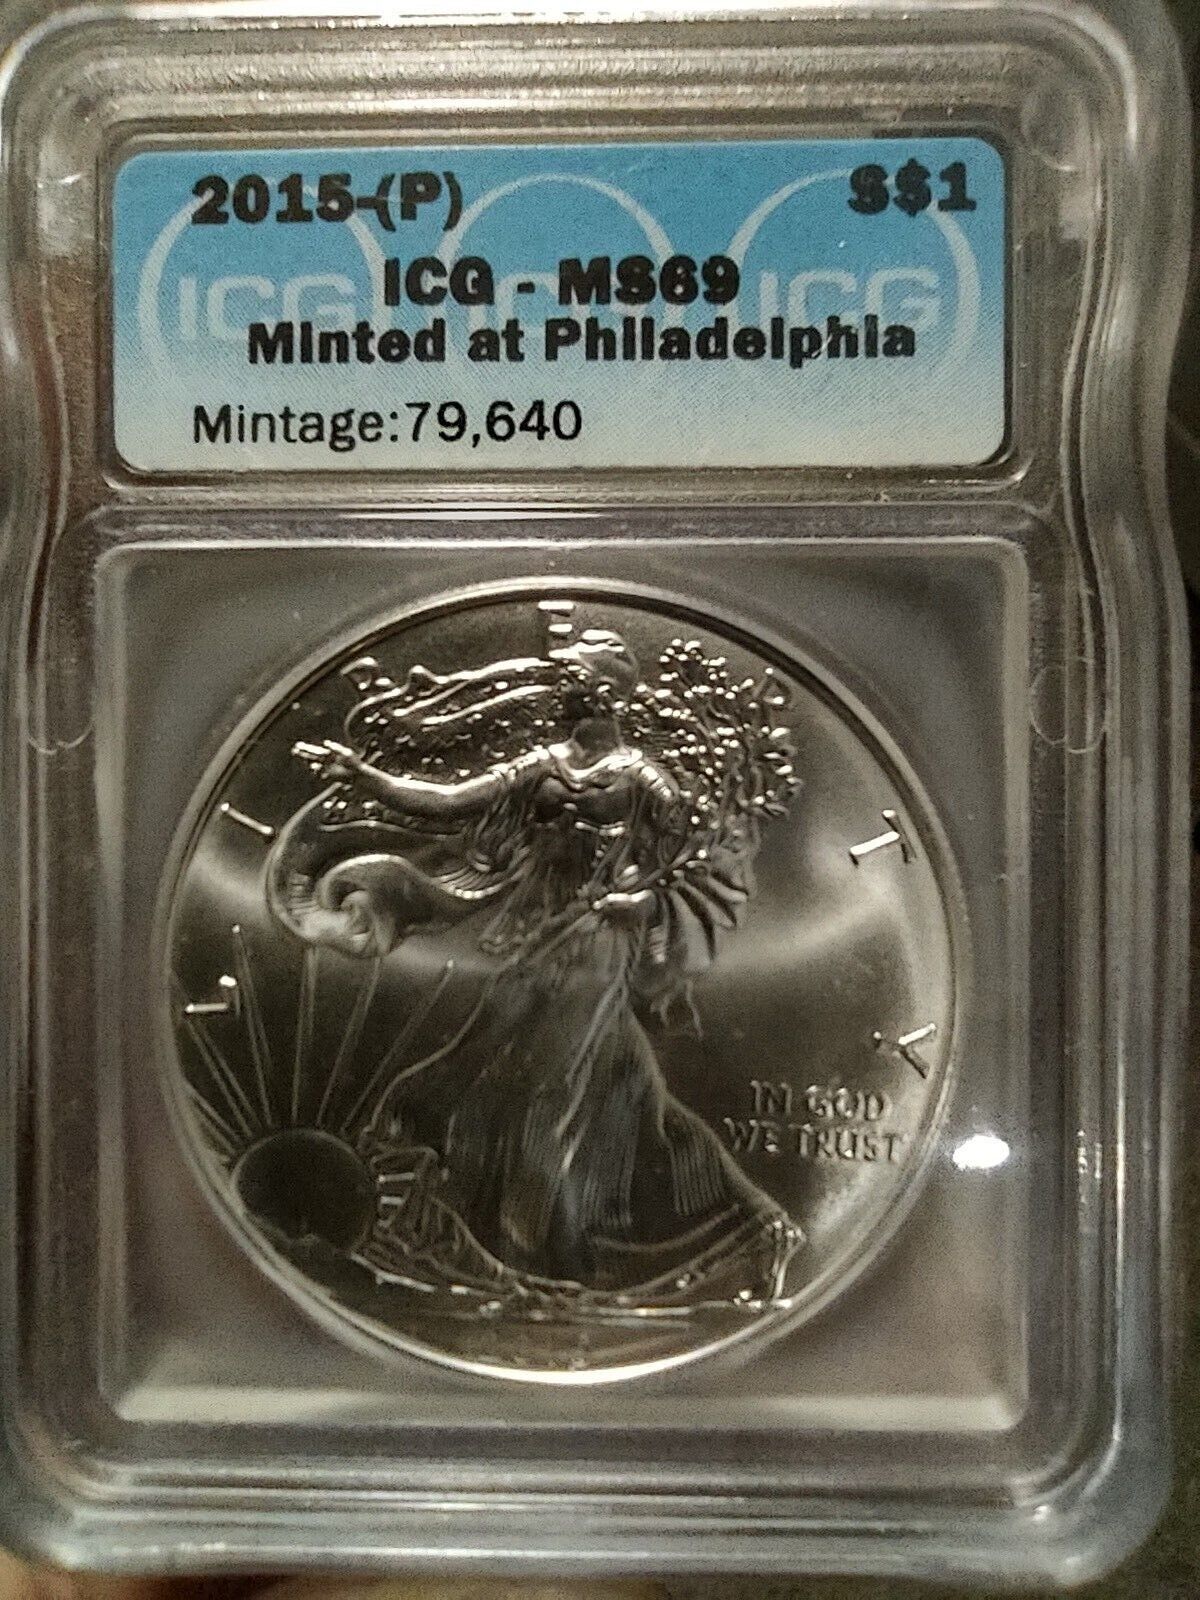 2015-(P) Minted at Philadelphia $1 American Silver Eagle ICG MS69 Mintage 79,640